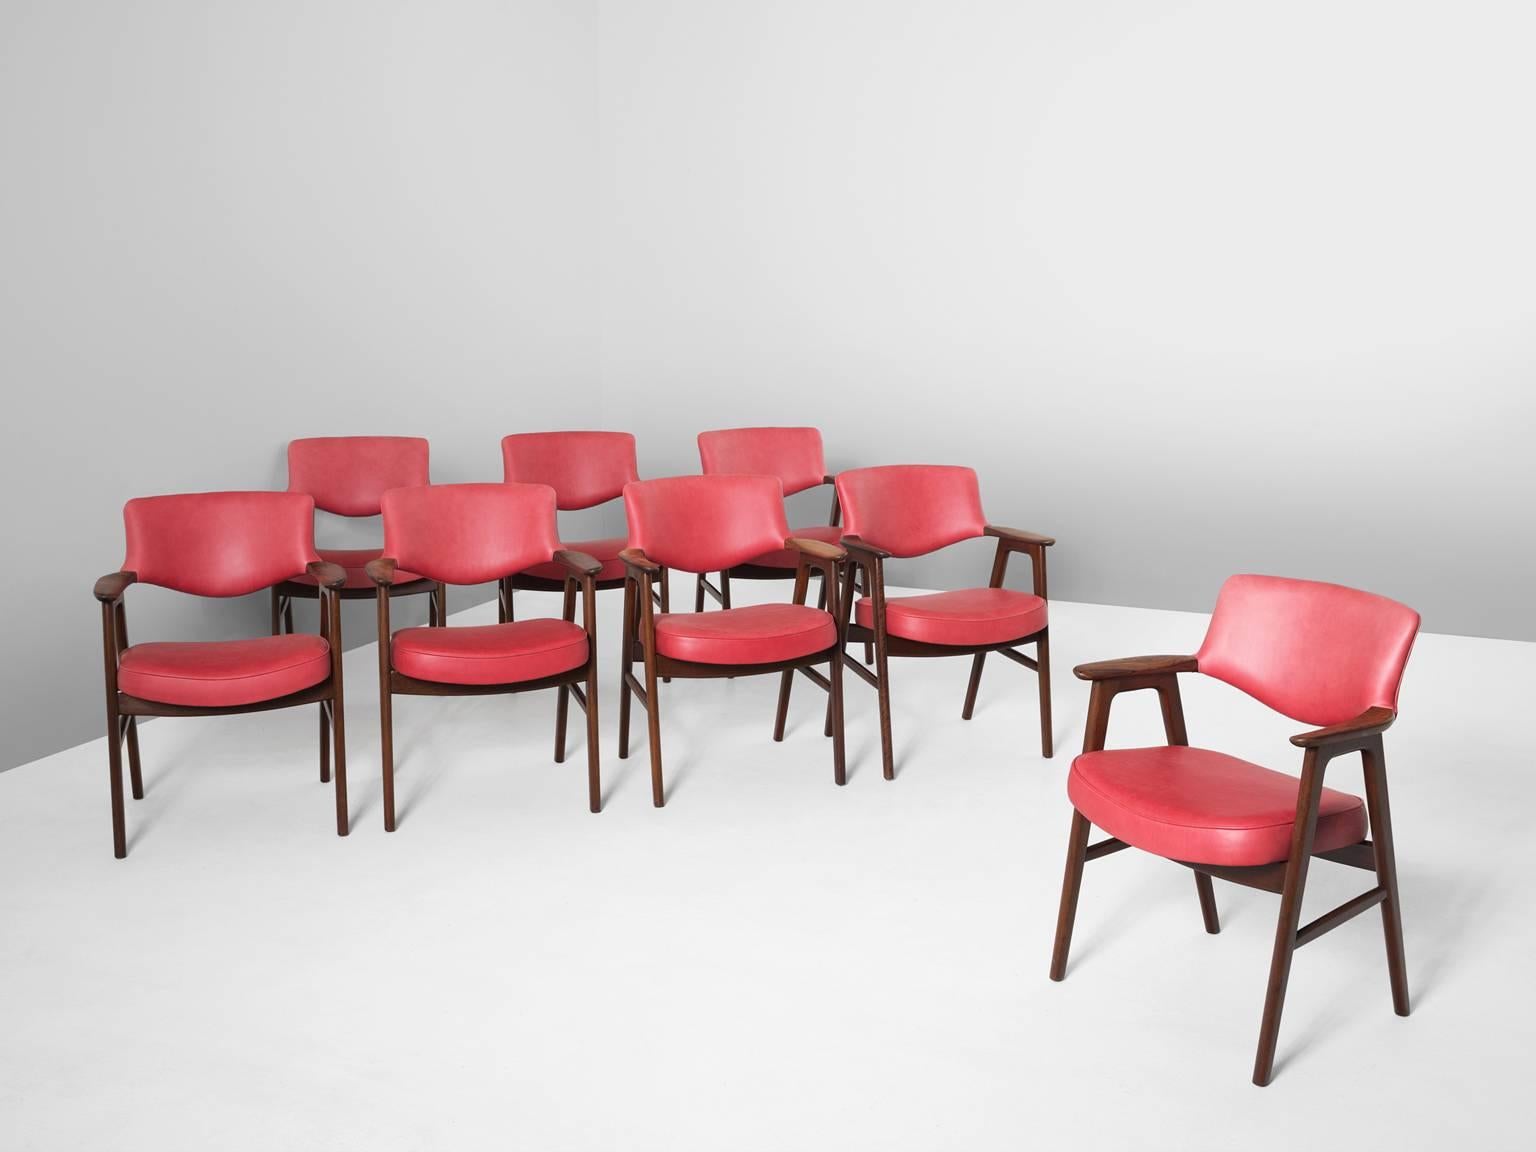 Set of eight armchairs, in rosewood and leather, Denmark, circa 1952.

Very comfortable dining chairs, due to well-shaped armrests and ergonomic proportions of the back and seat. The sculptural back is very attractive, as the beautifully curved